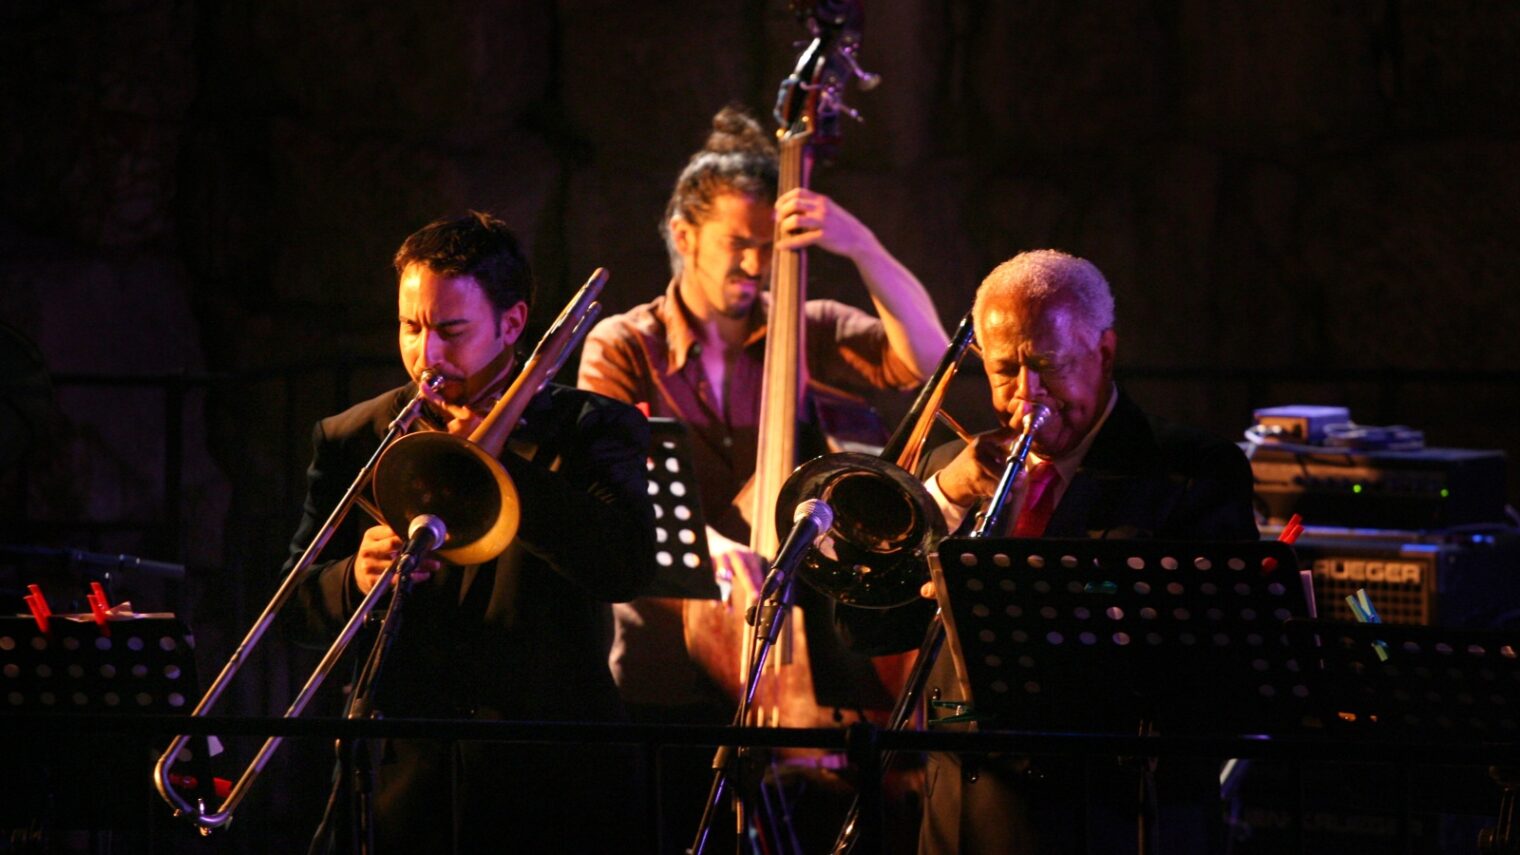 A jazz performance of  "The Trombones of Slide Hampton" during the Jerusalem Jazz Festival in Tower of David museum in the old city of Jerusalem. Photo by Michal Fattal/Flash90